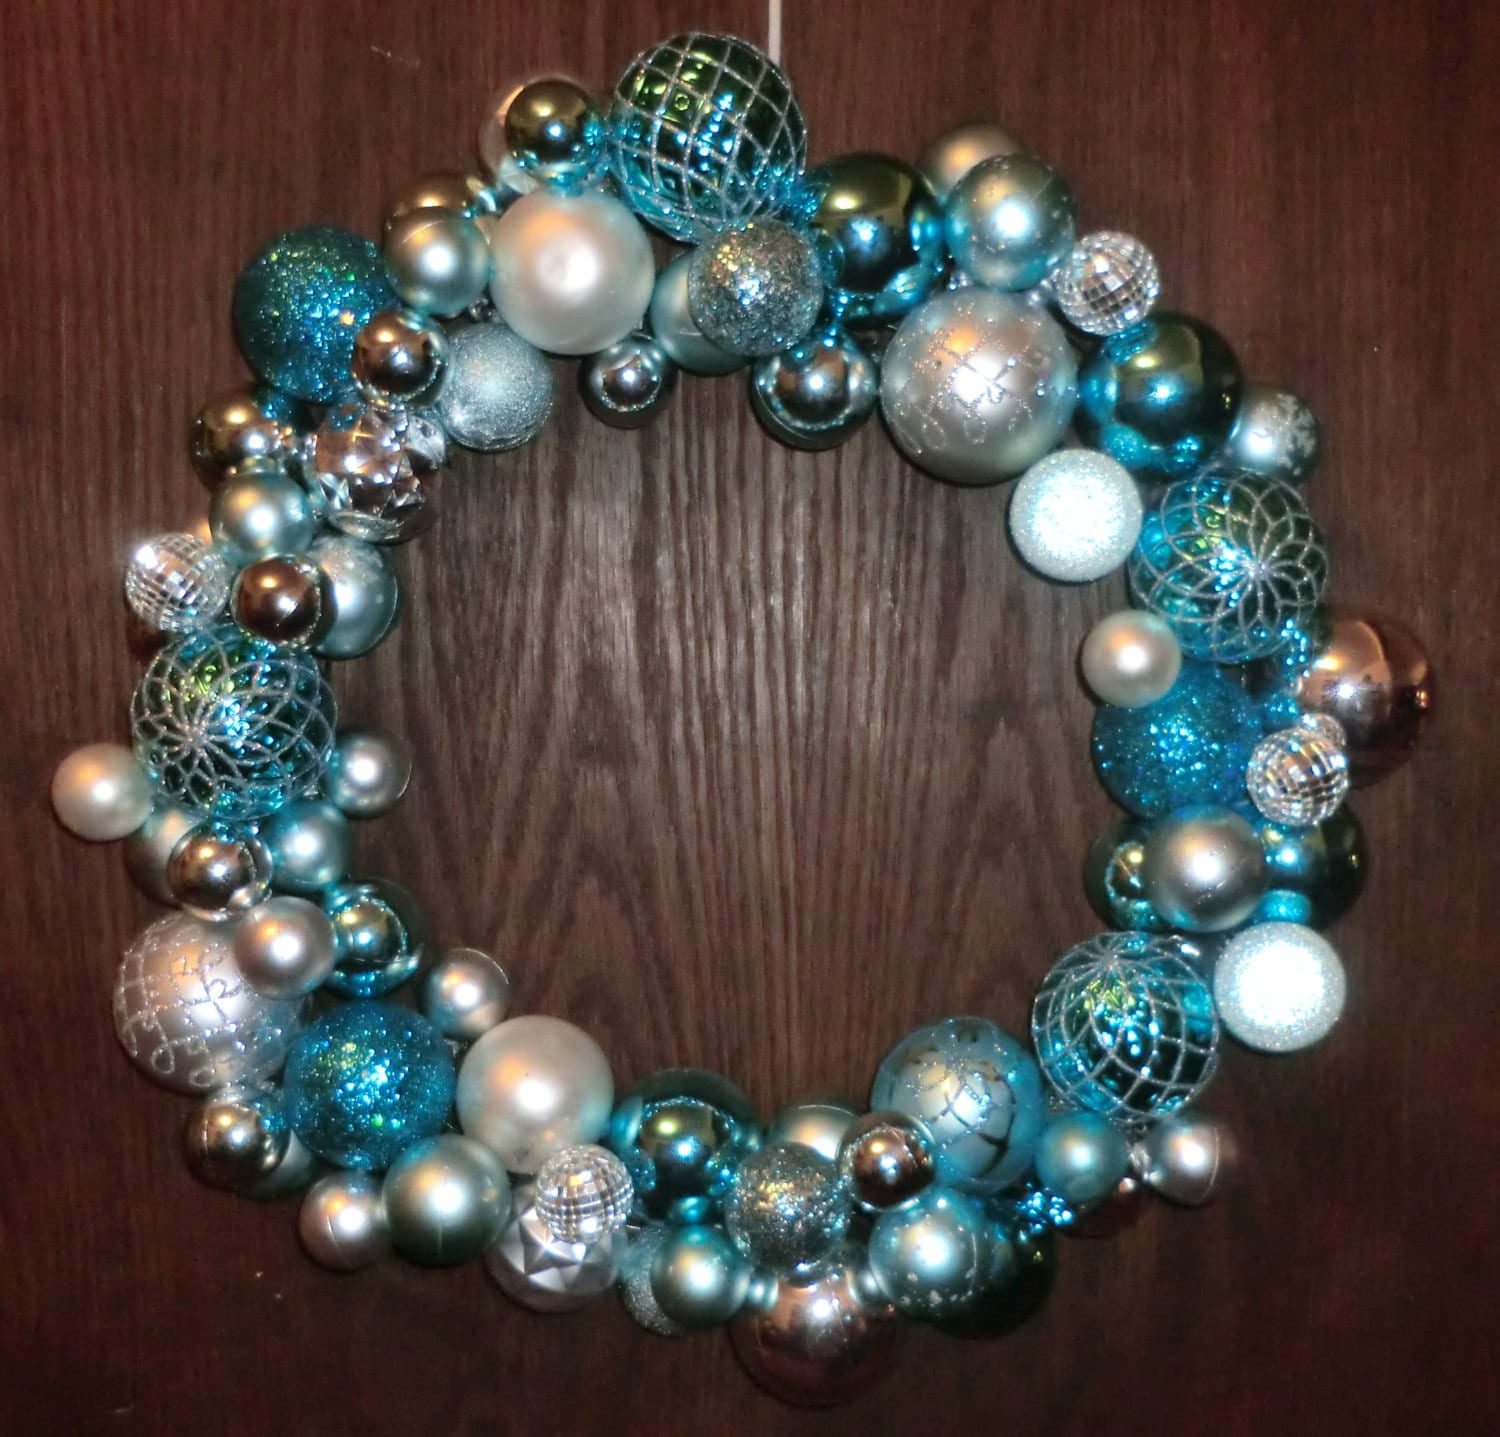 REDUCED PRICE Blue and Silver Ornament Wreath~ After Christmas Sale